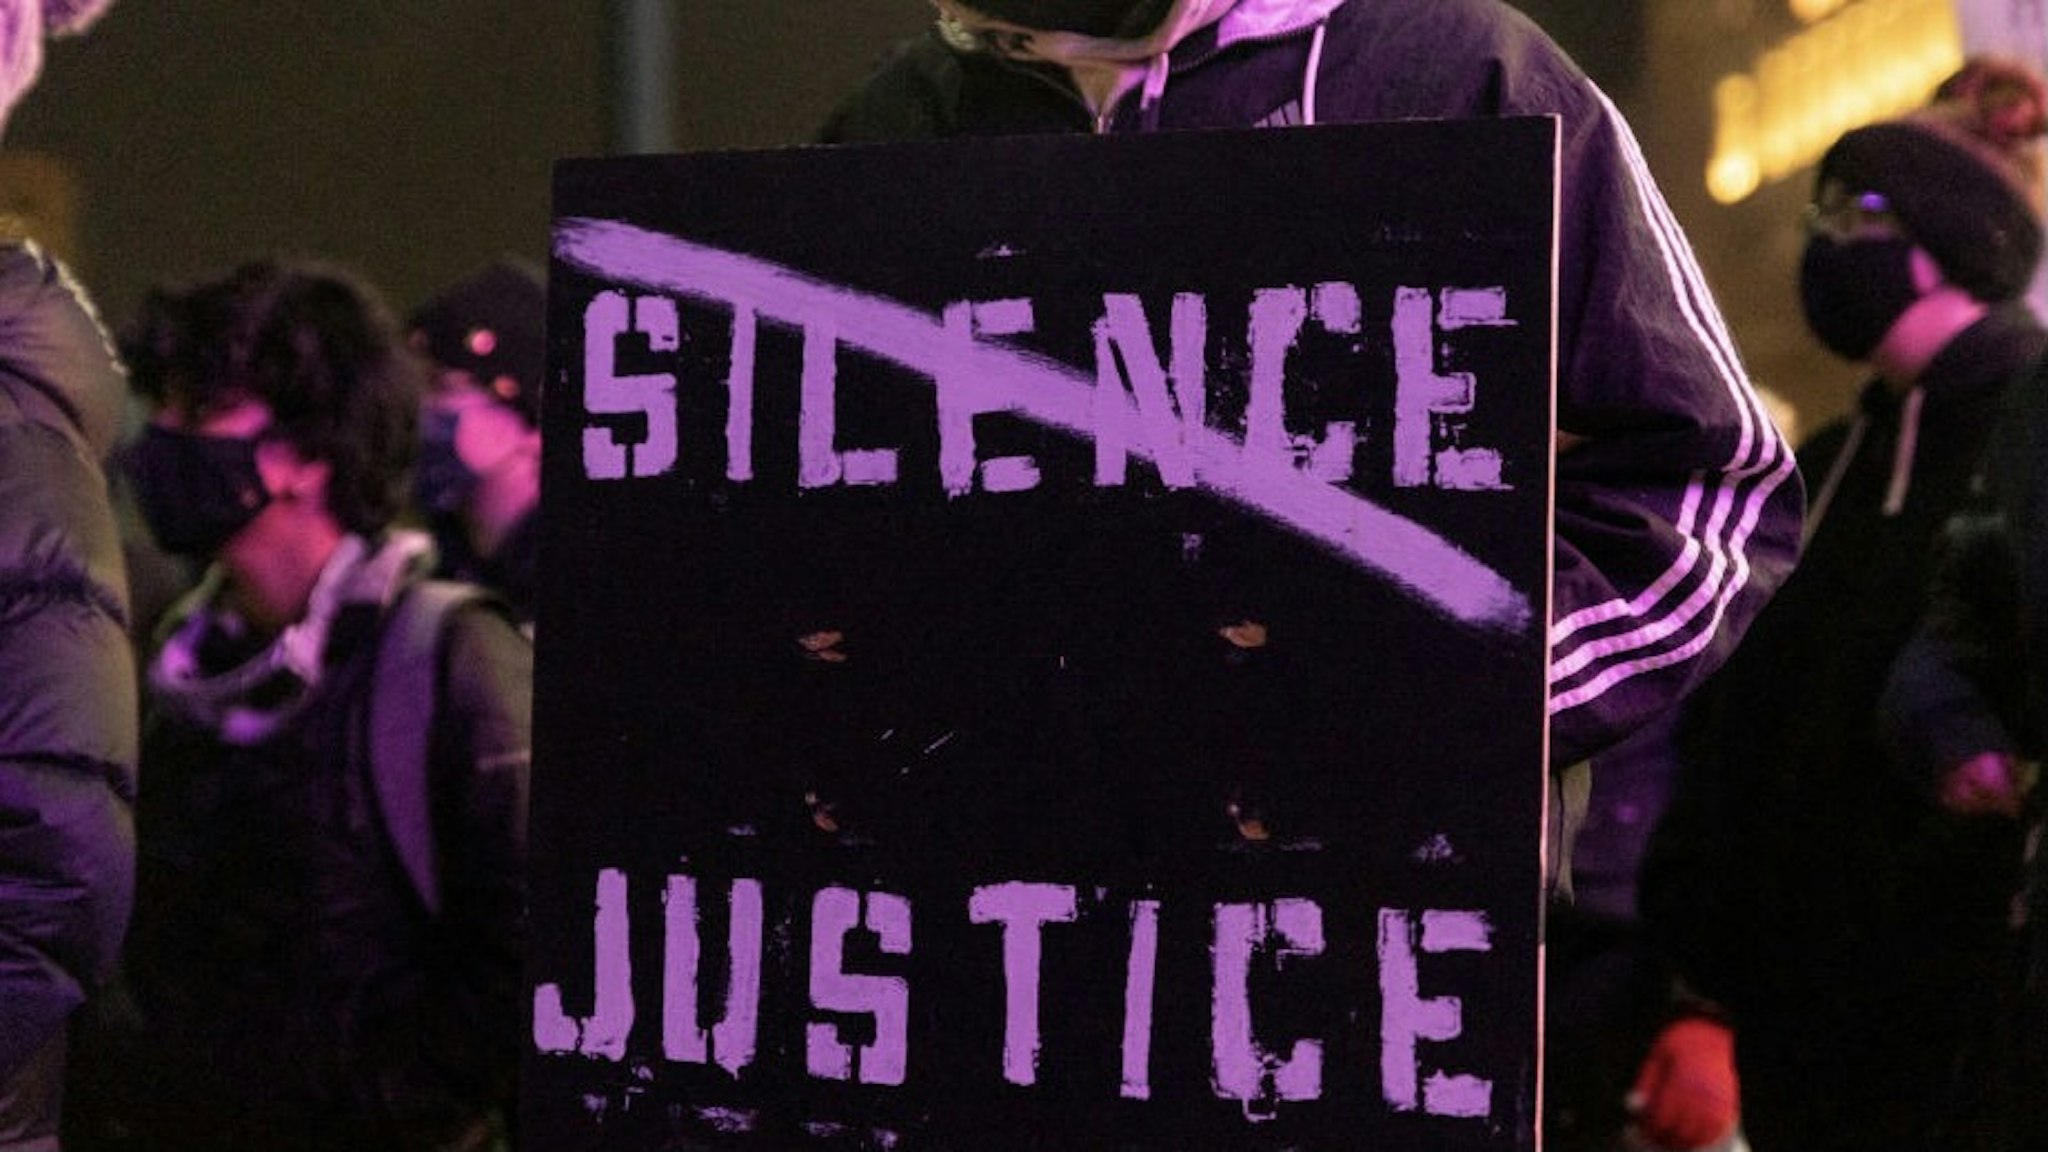 COLUMBUS, OH - APRIL 21: Black Lives Matter activist holds a sign against passivity in reaction to the police shooting of MaKhia Bryant on April 21, 2021 in Columbus, Ohio. Black Lives Matter activists met at Columbus Police Headquarters, marched to the Ohio Supreme Court and then to the Ohio Statehouse to protest the killing of Bryant on April 20th. (Photo by Stephen Zenner/Getty Images)